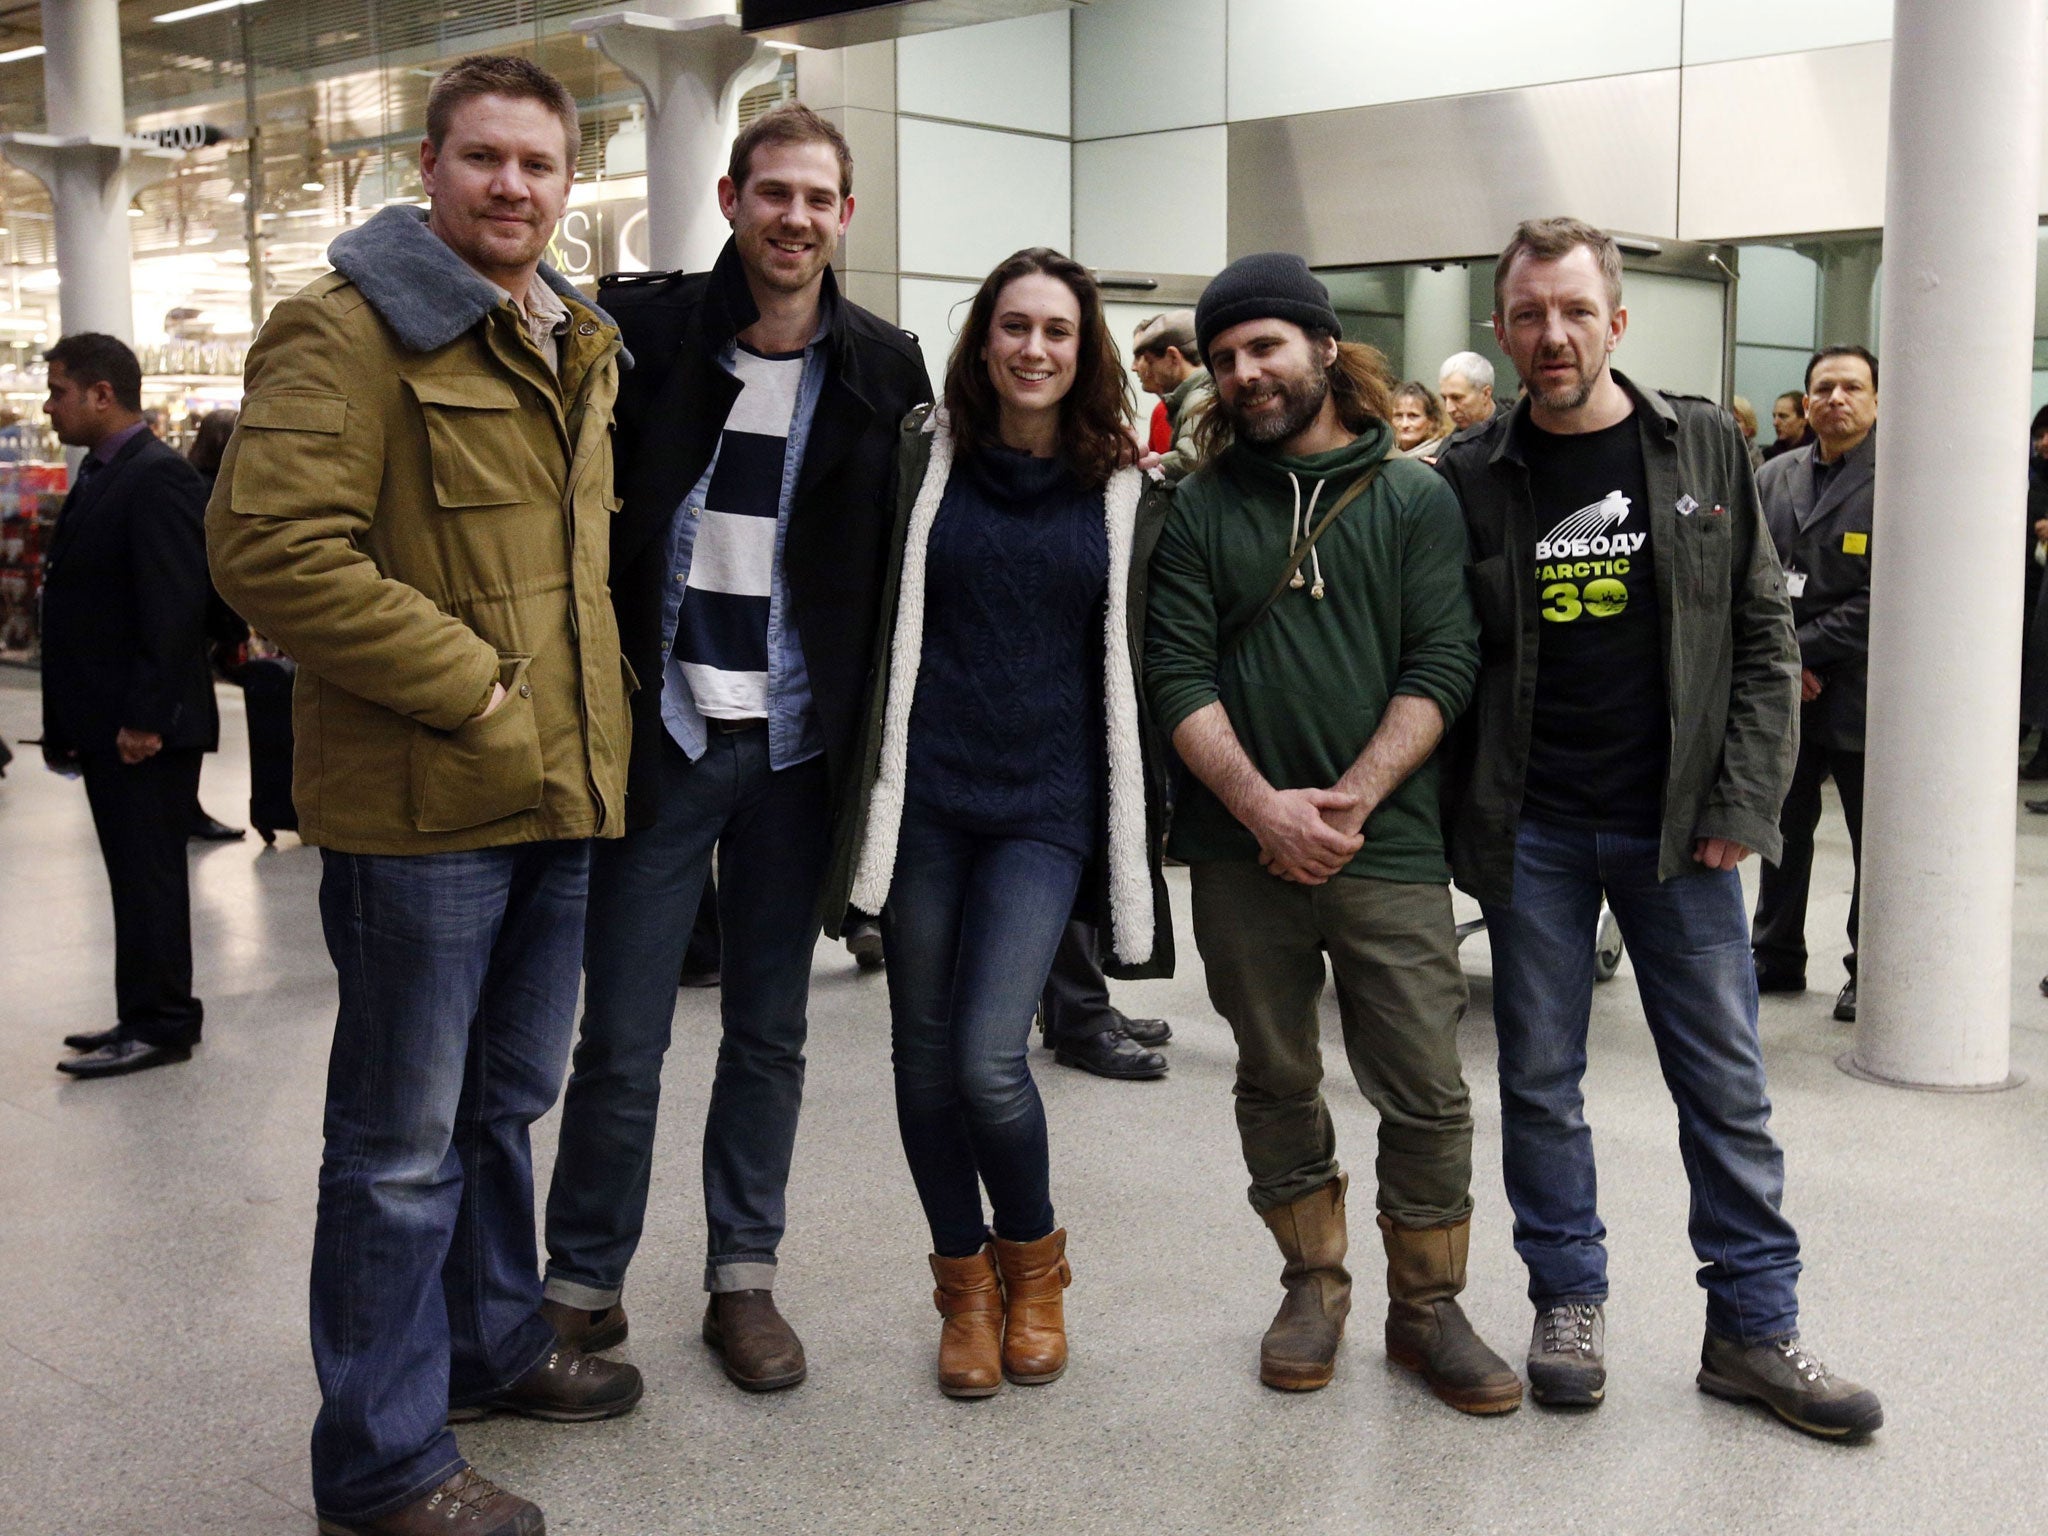 Freelance videographer Kieron Bryan (second left) with Greenpeace activists, Anthony Perrett (left), Alexandra Harris, Iain Rogers and Phil Ball (right), as they arrive at St Pancras Station, London, after being detained in Russia as part of the so-called